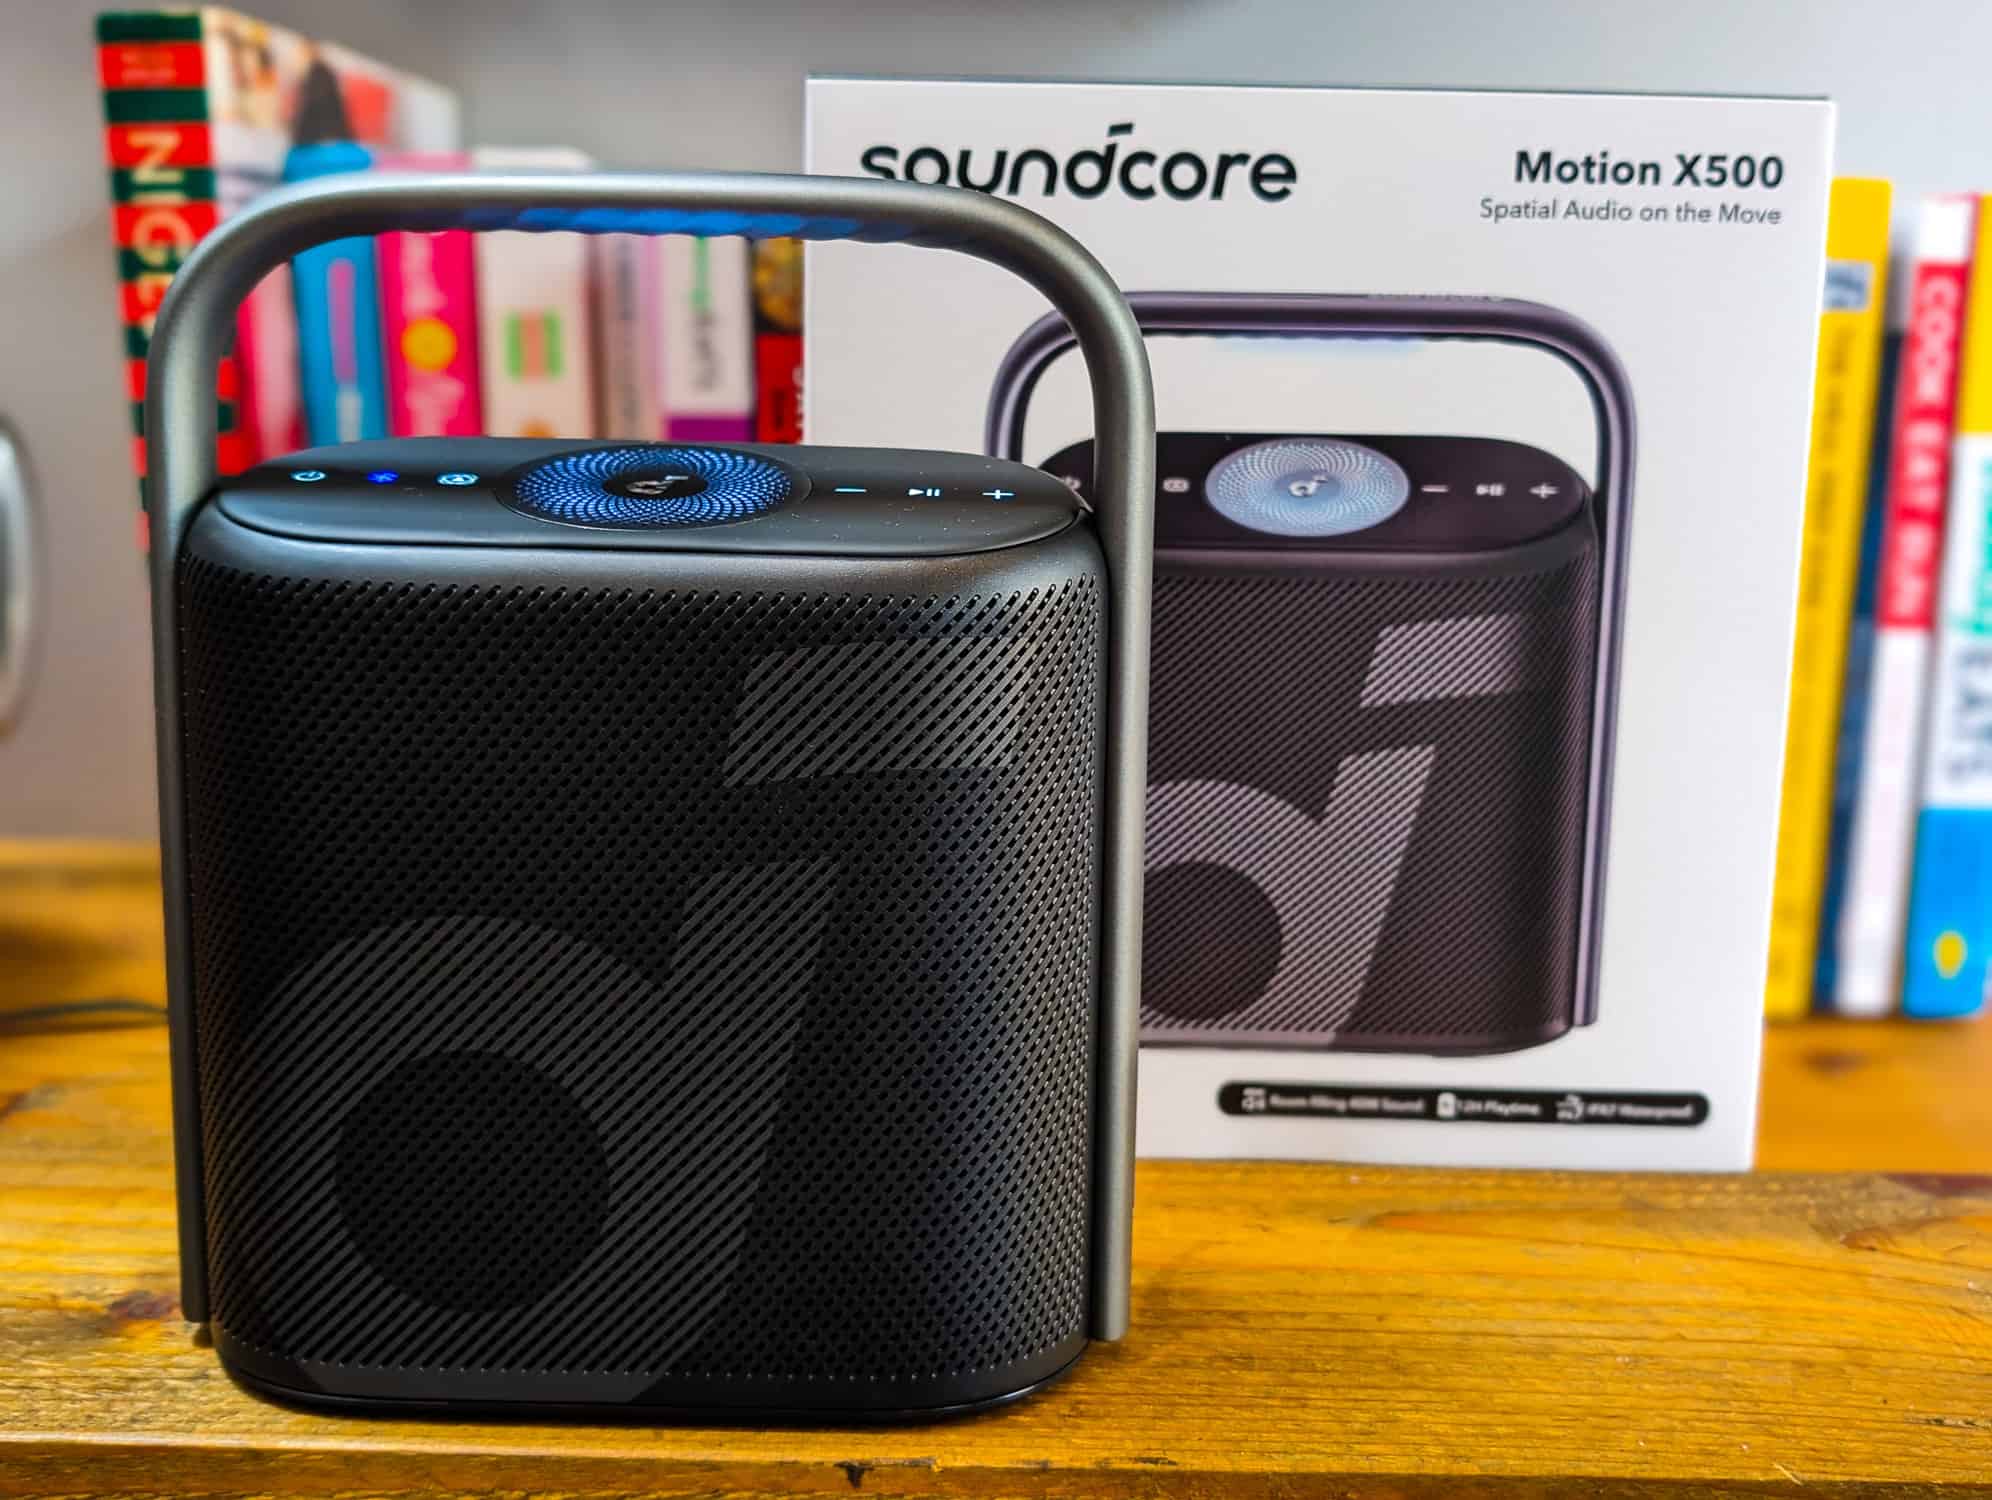 Soundcore Motion X500 Review – Cheaper Much More Bass vs Motion X600 Portable Bluetooth Speaker